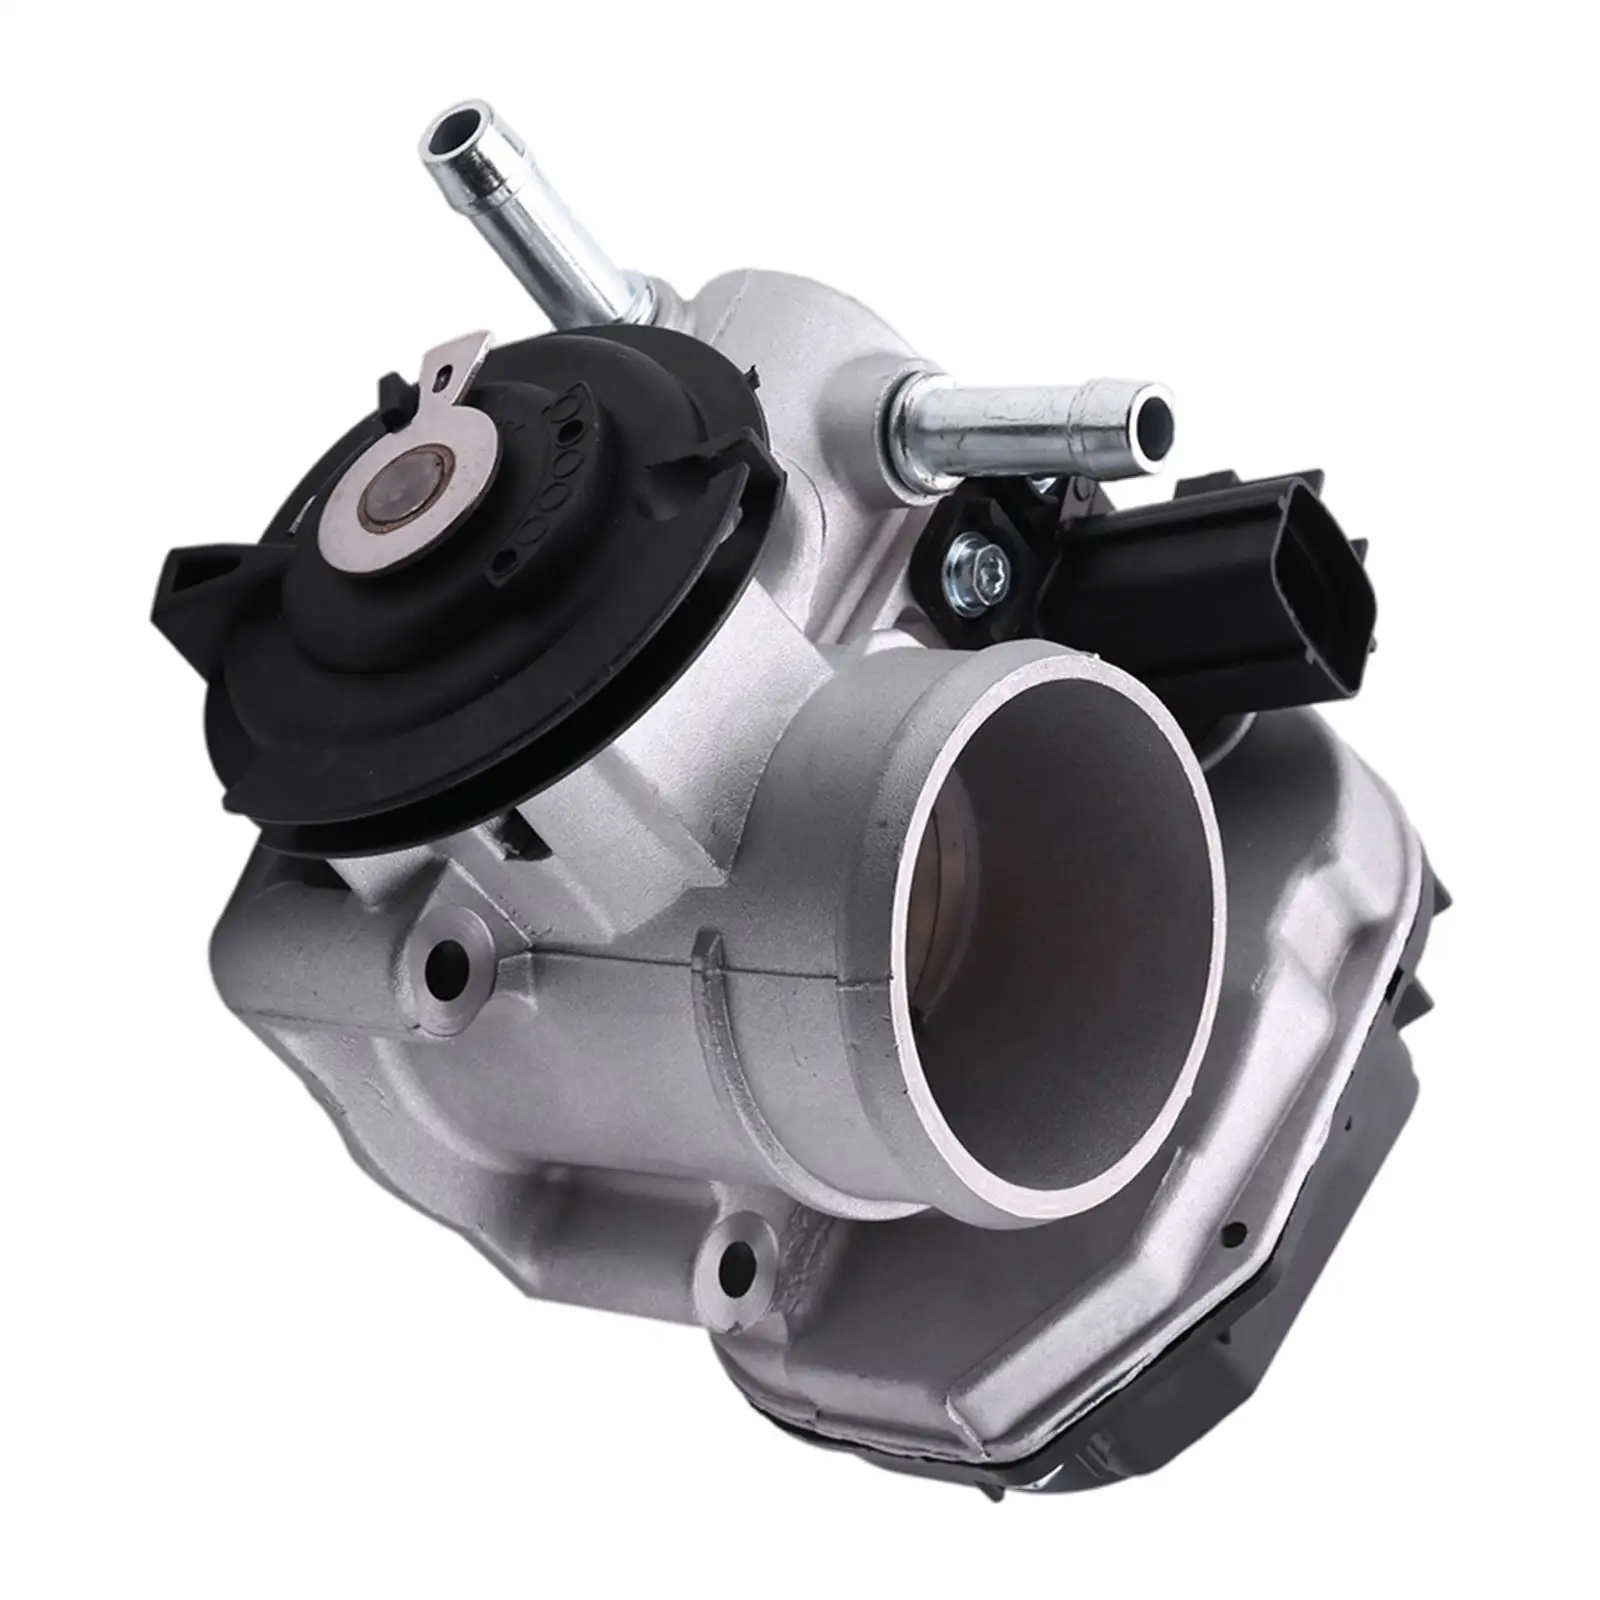 Throttle Body Assembly Low Impurity High Strength Fuel Injection Fit for Daewoo Nubira 1.4i 1.6i 96394330 96815480 Accessories